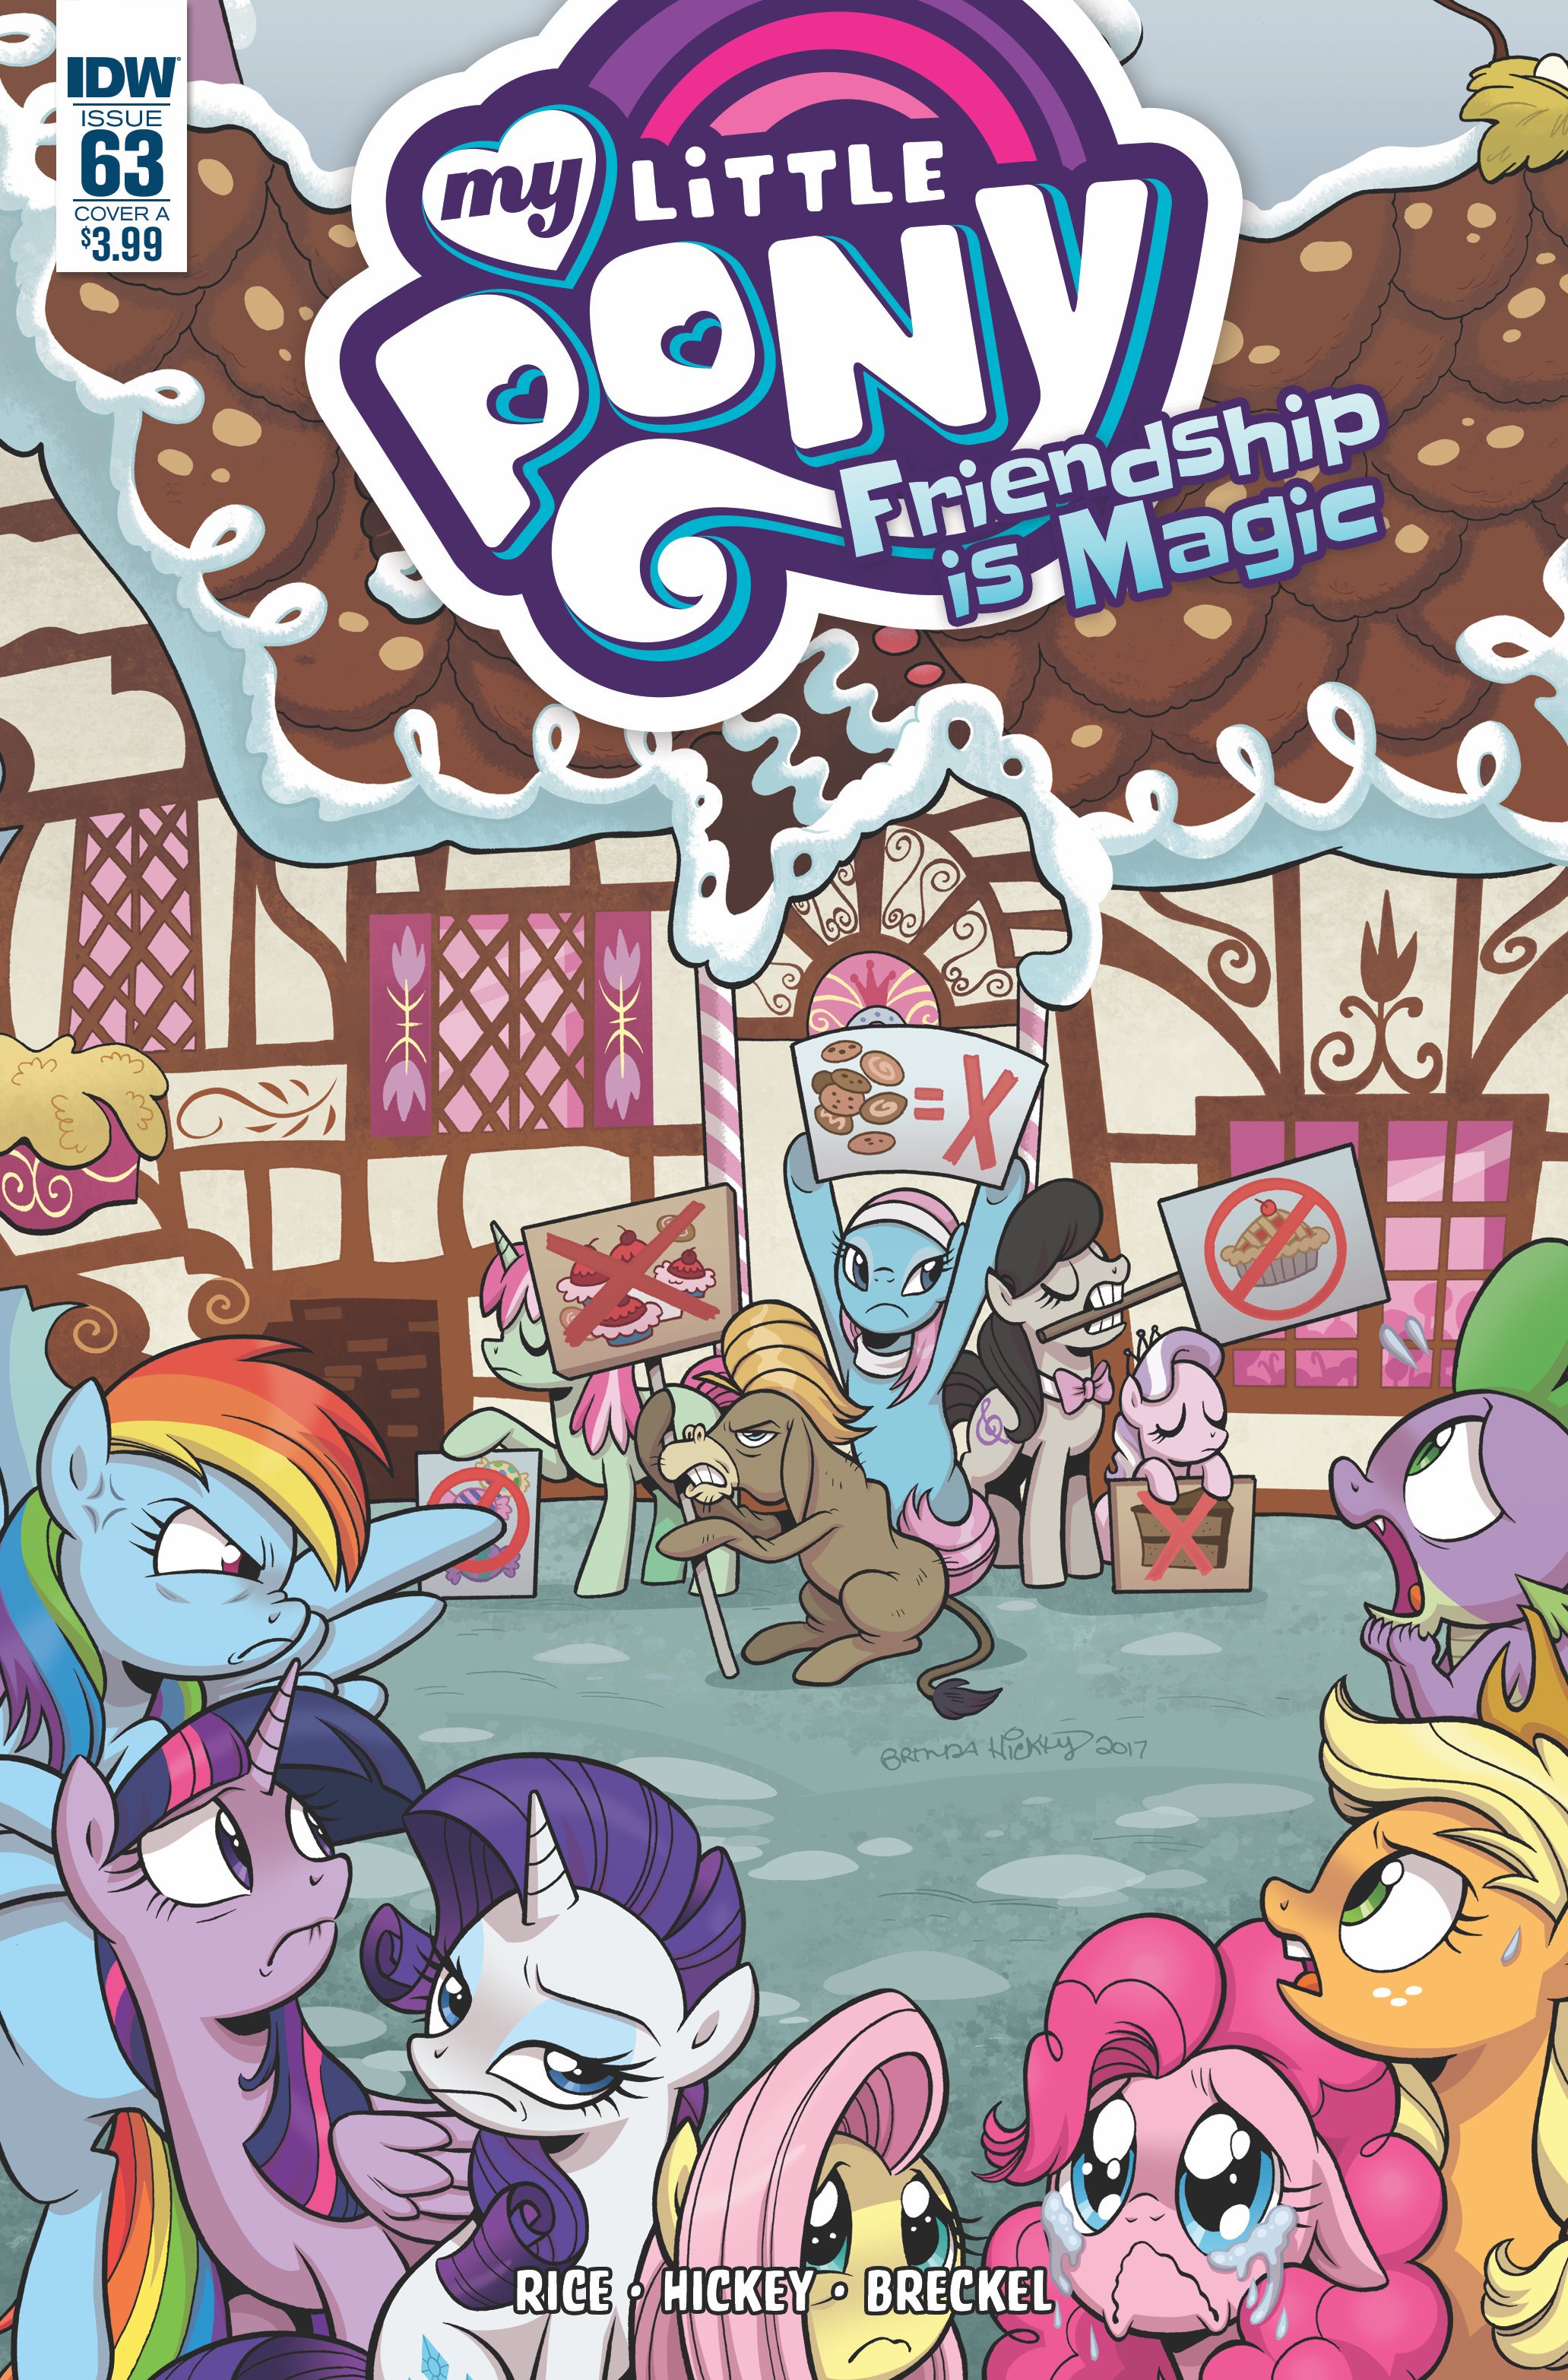 Friendship Is Magic Issue 63 My Little Pony Friendship Is Magic